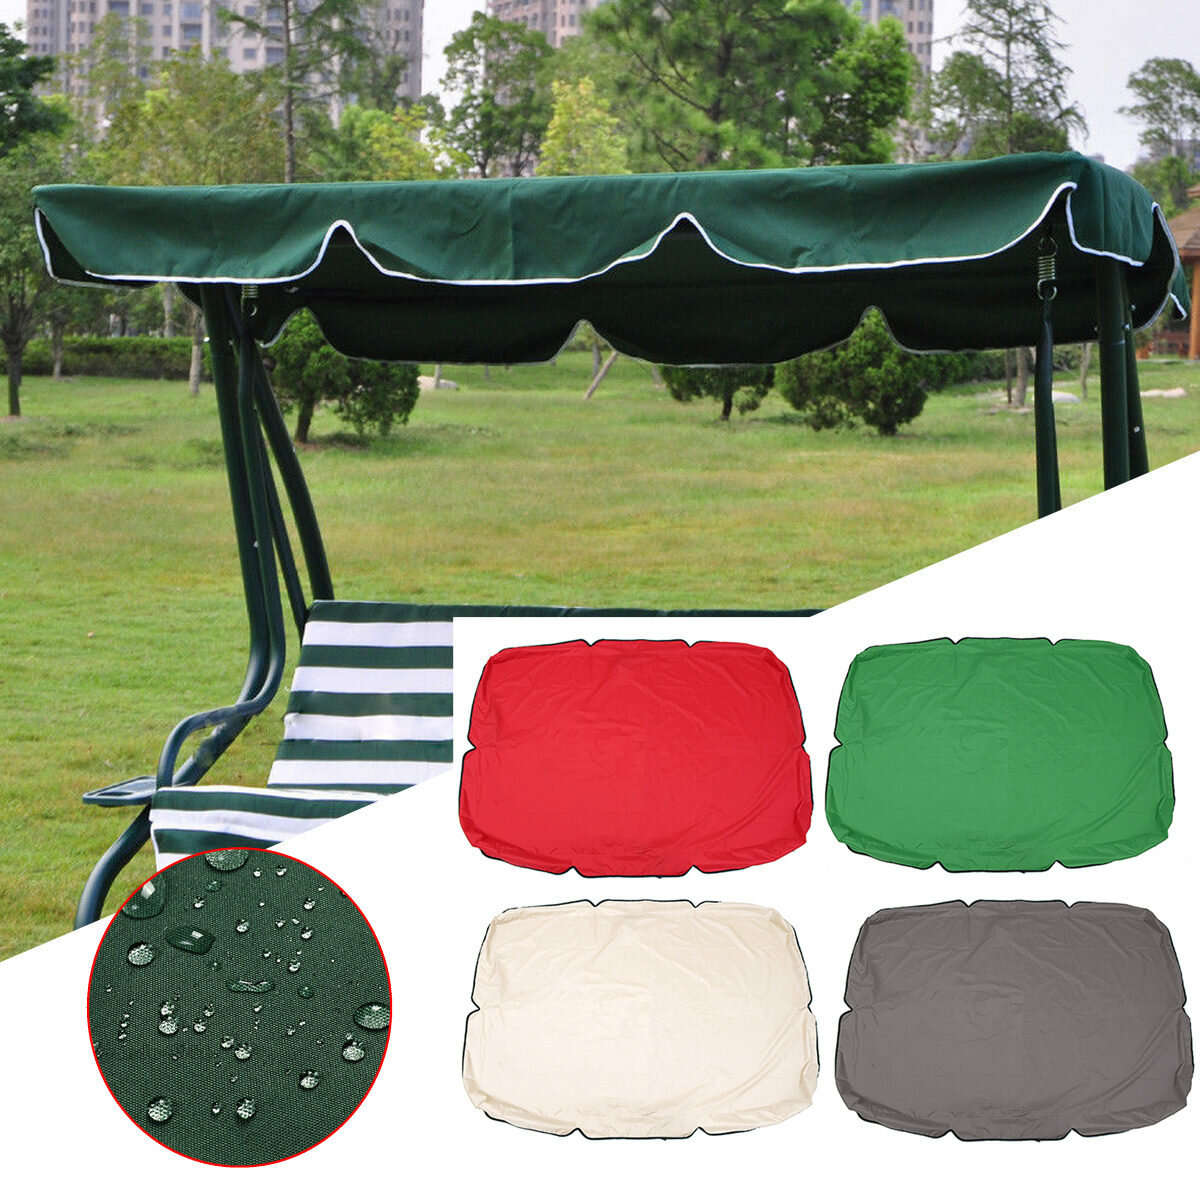 Summer Swing Top Cover Canopy Replacement Furniture Waterproof Cover for Garden Courtyard Outdoor Swing Chair Hammock Canopy Swing Chair Awning